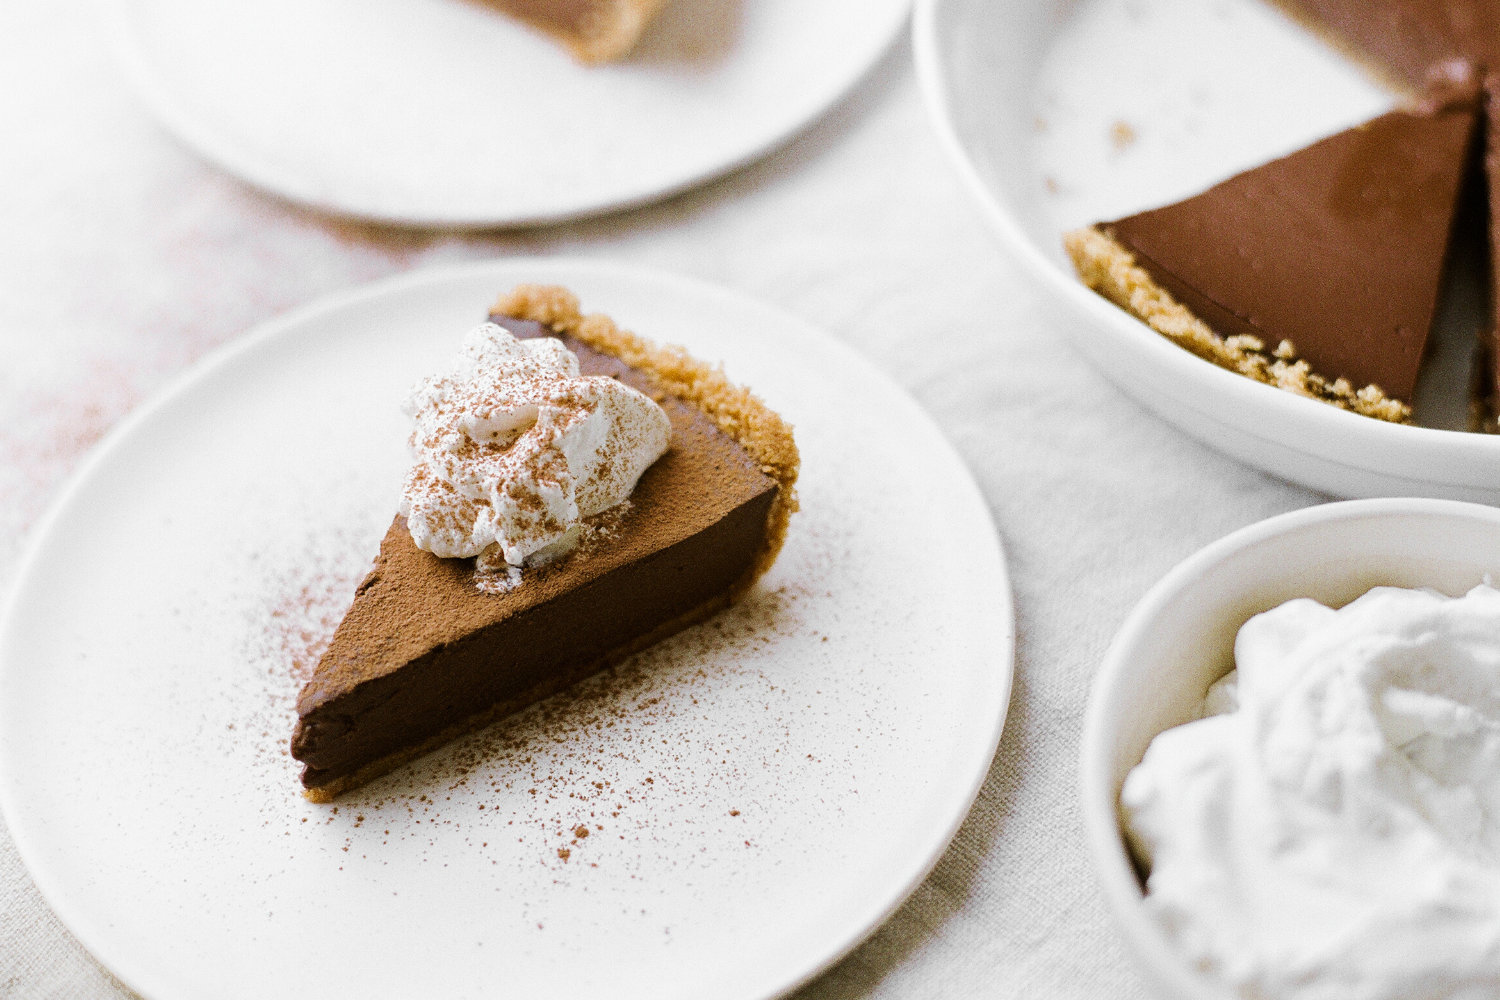 chocolate pudding pie slices on plates, ready to serve